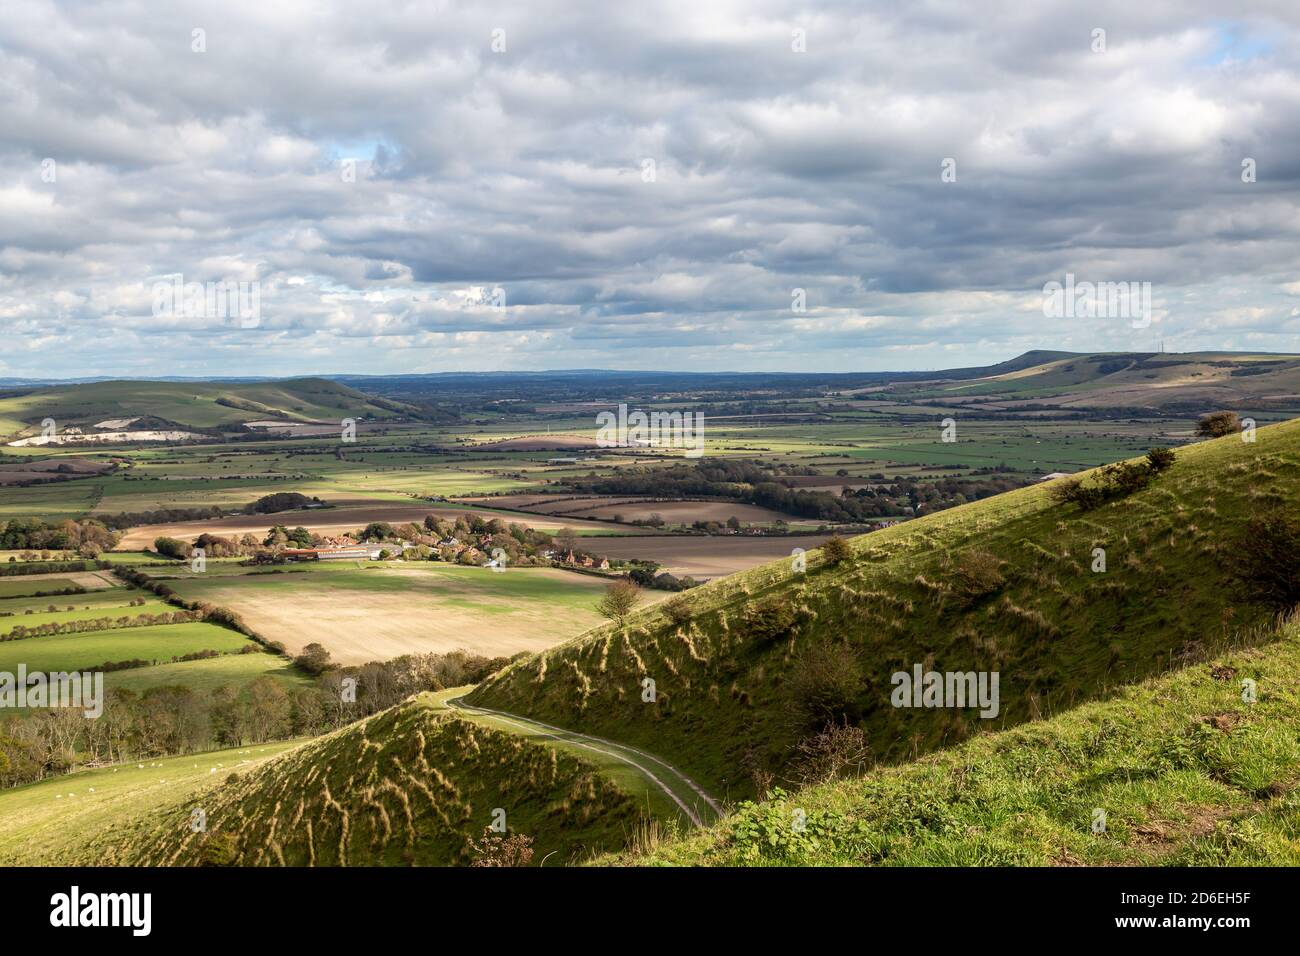 Looking across the Sussex countryside towards Firle Beacon, from Kingston Ridge along the South Downs Way Stock Photo